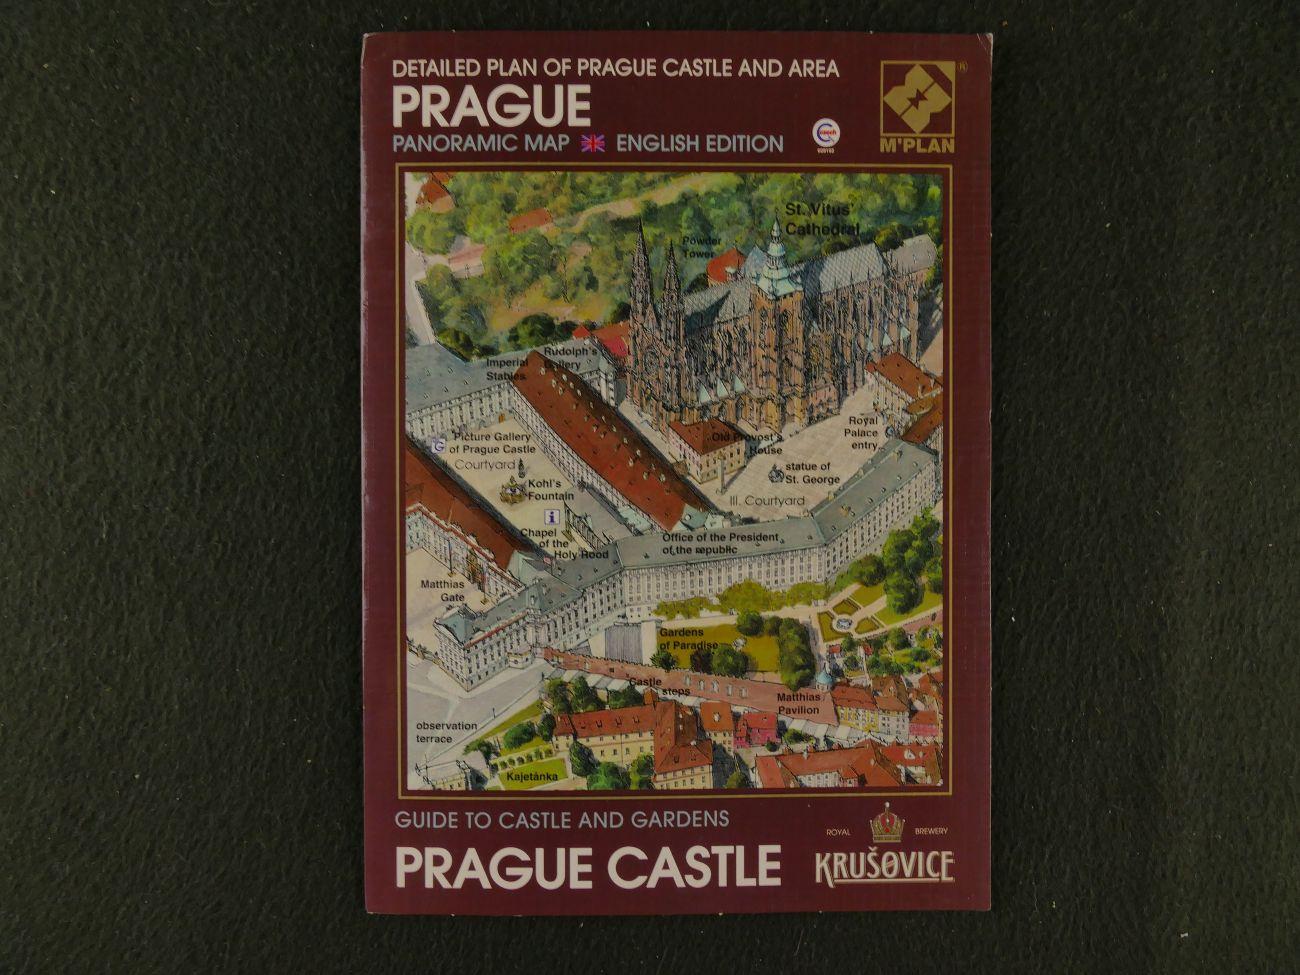 Rimal, Vladimir - Prague panoramic map, detailed plan of Prague Castle and area. Prague Castle. Guide to castle and gardens. (3 foto's)